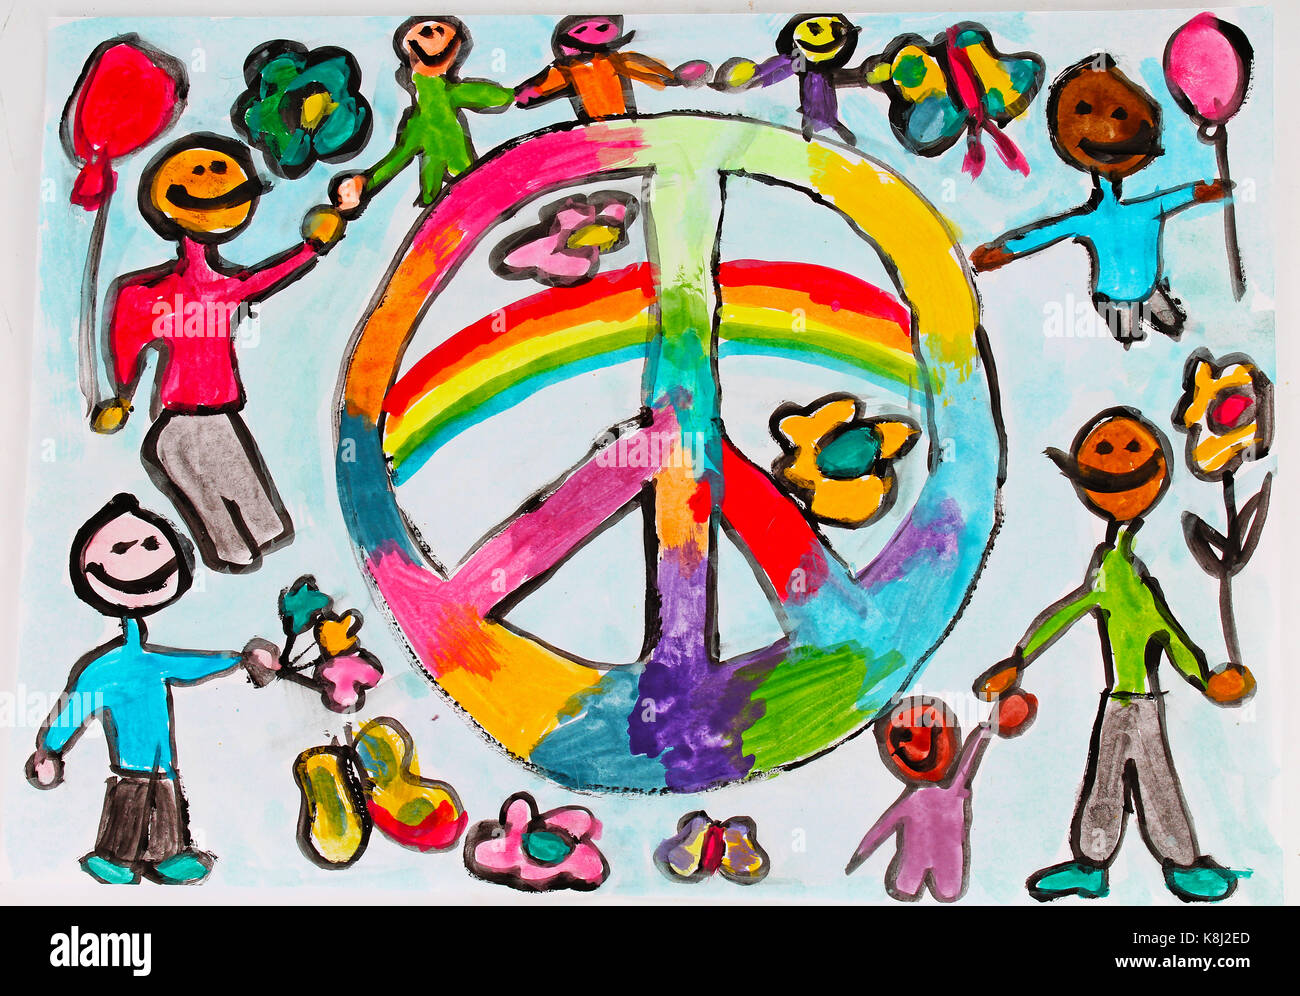 World peace child draw. Children drawings kid's draws collection